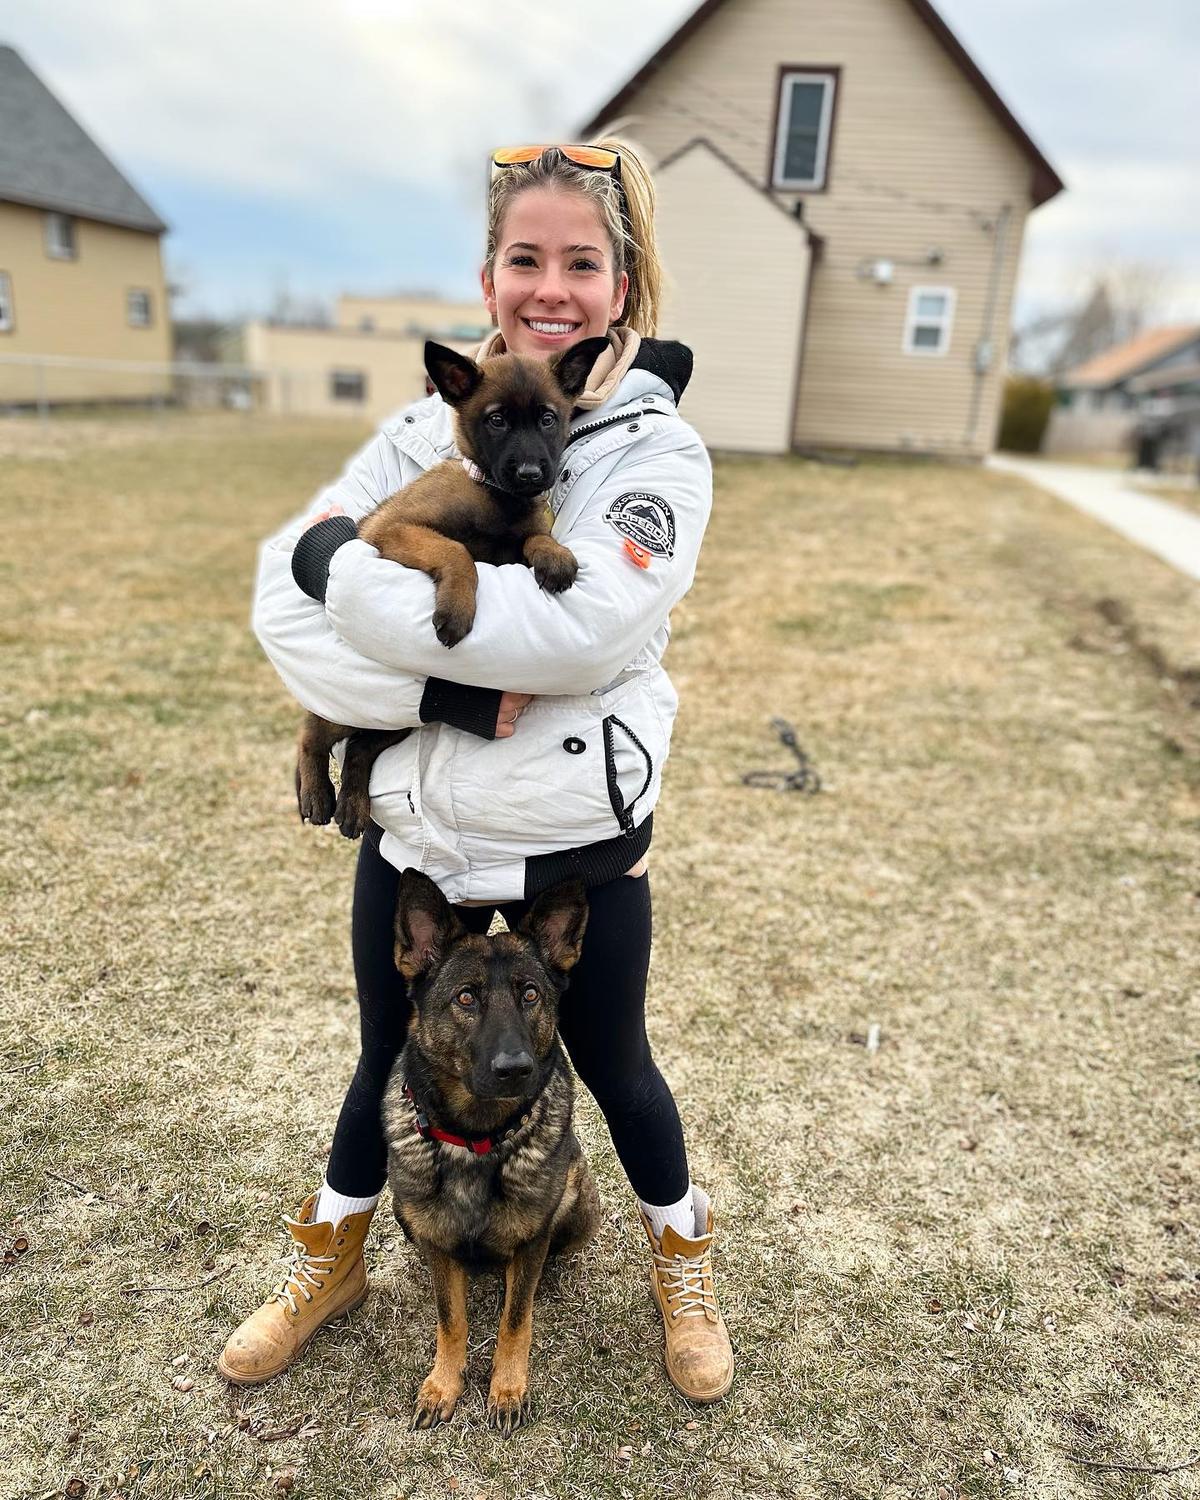  Colorado-born Jeniffer Worswick has made it her life's work to train and help dogs and their owners better their bond. (Courtesy of <a href="https://www.instagram.com/toppawk9s/">Top Paw K9 Academy</a>)